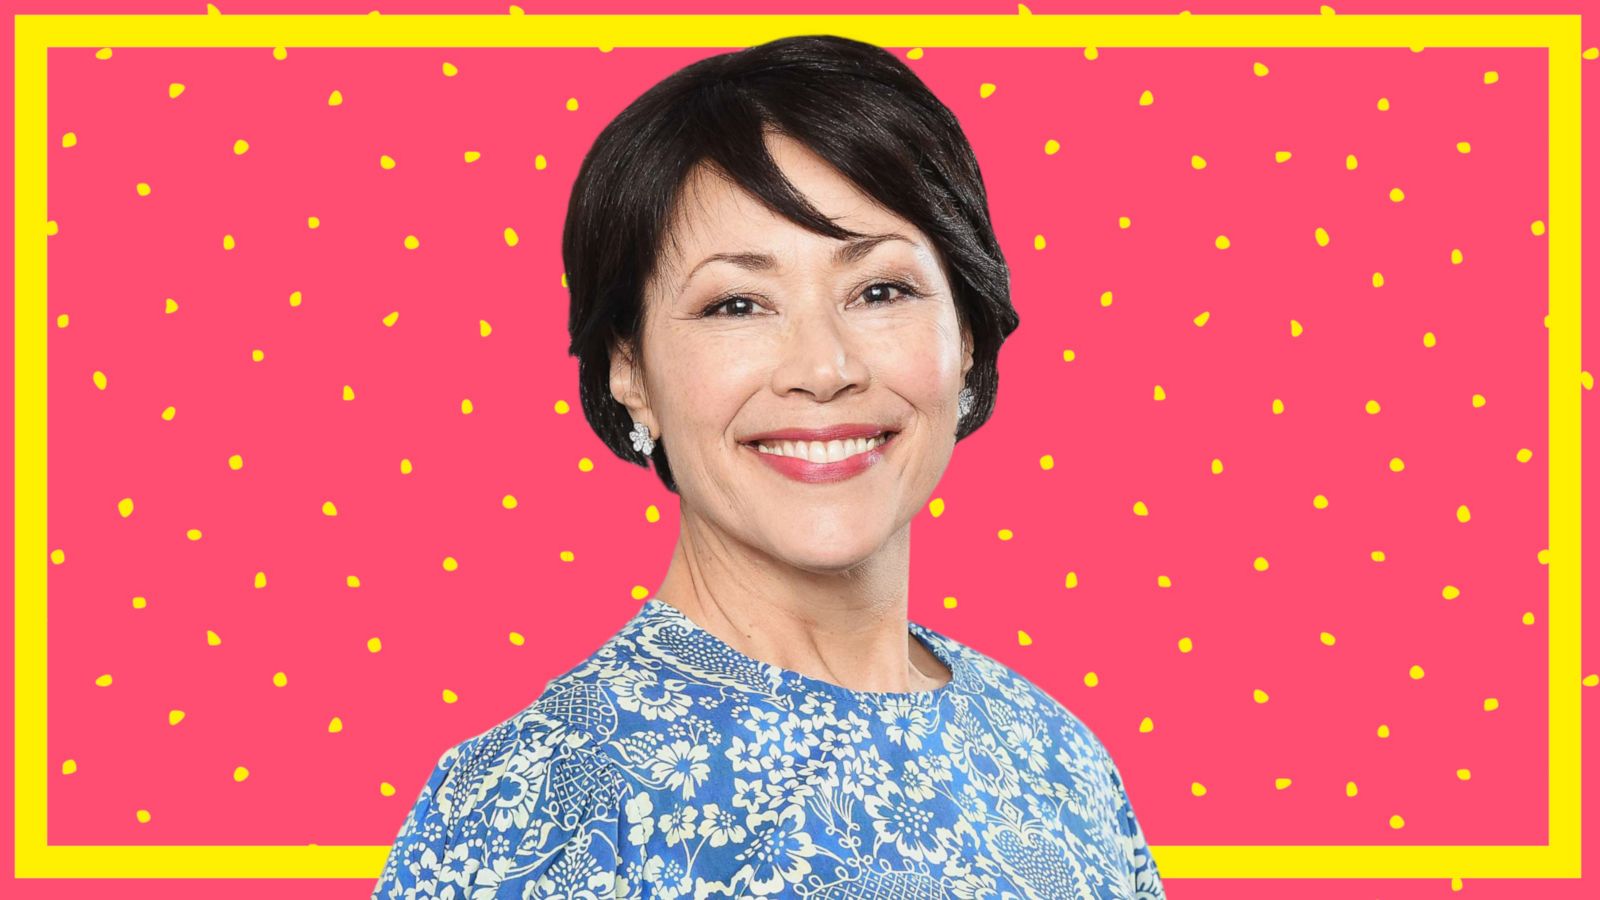 VIDEO: Journalist Ann Curry's first boss told her ‘Women have no news judgment’